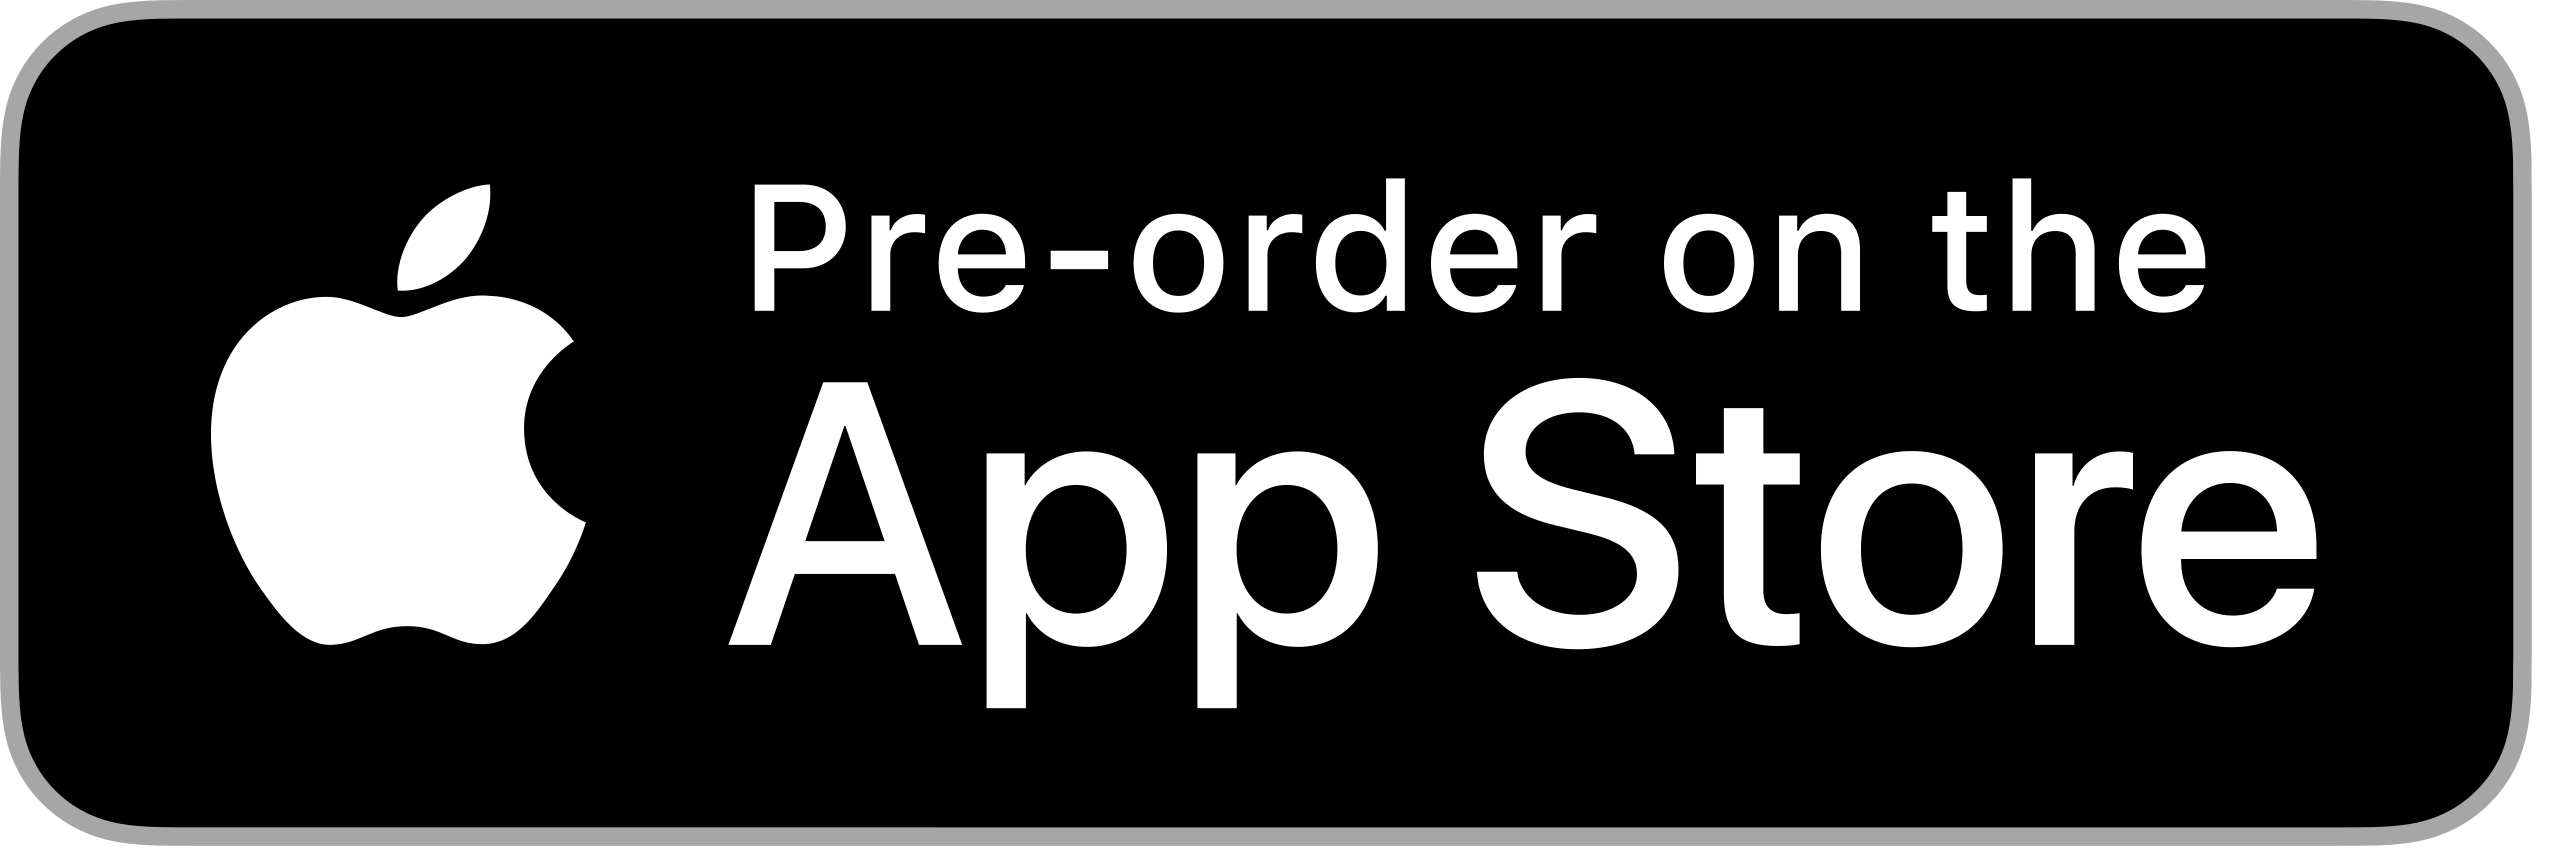 File:Pre-order on the App Store Badge US-UK RGB blk.svg - Wikimedia Commons